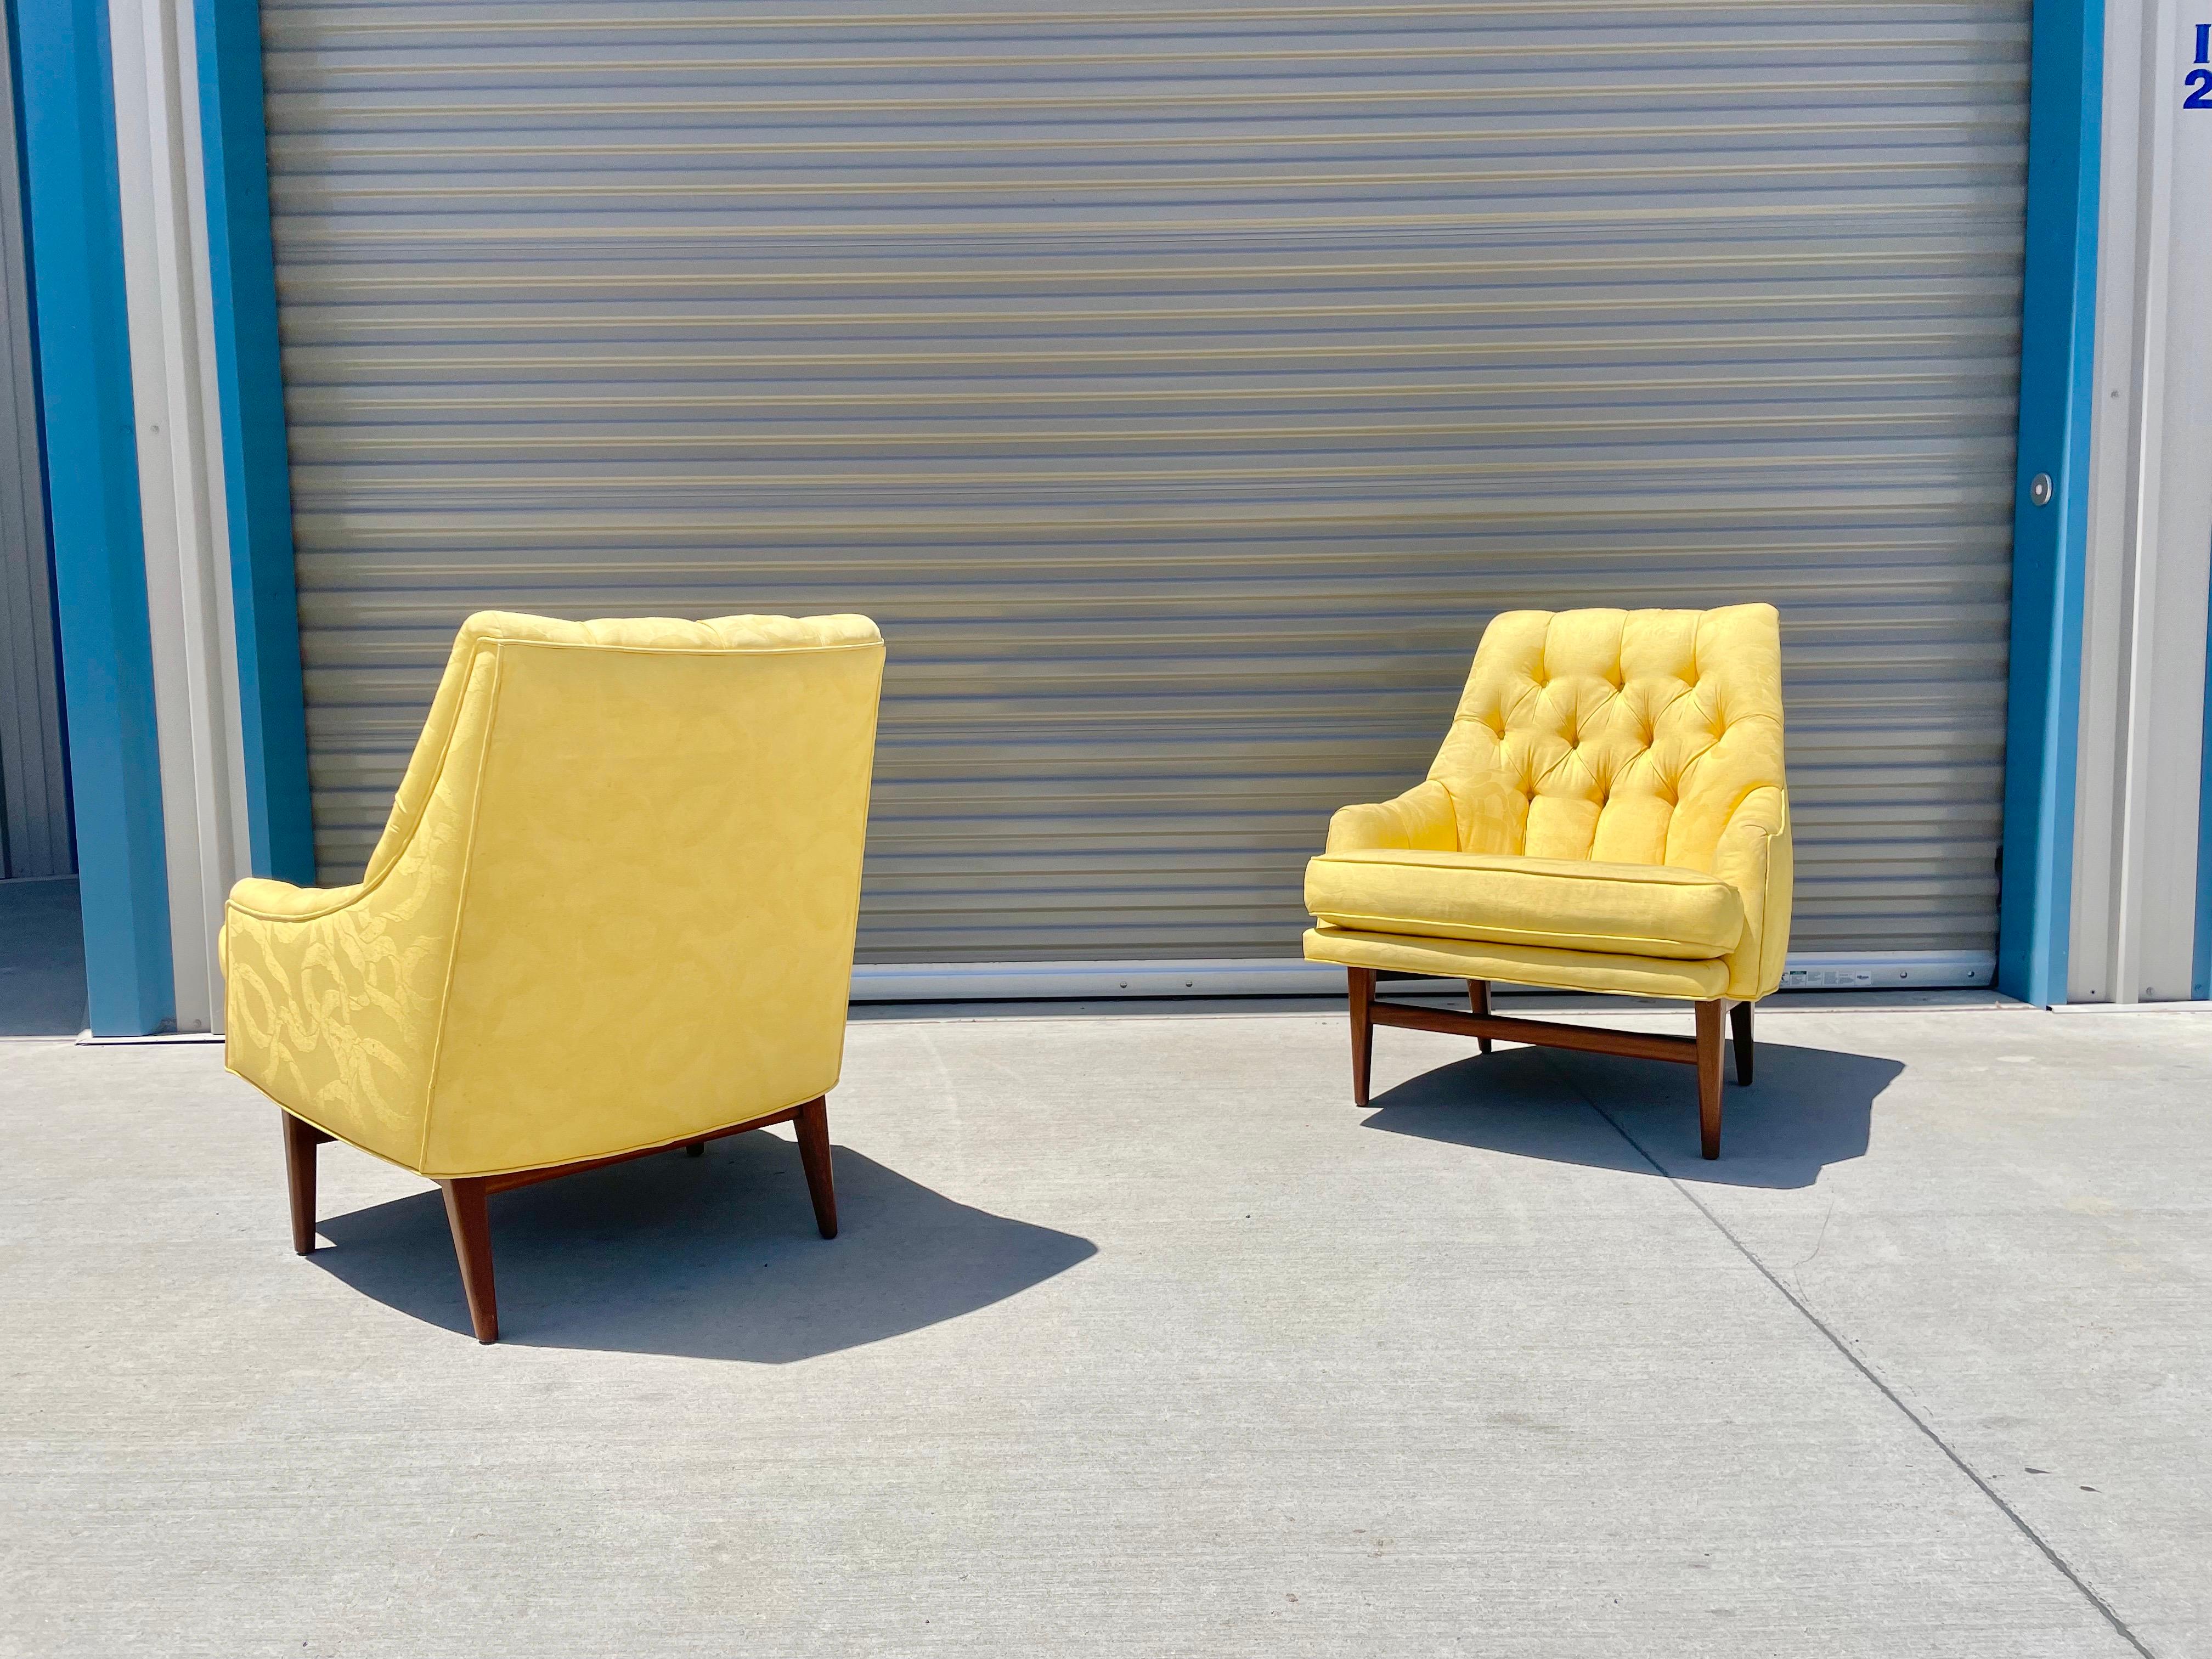 Midcentury walnut lounge chairs attributed to Monteverdi Young These vintage lounge chairs feature a yellow tufted upholstery with a sculptural solid walnut base. The chairs can be used as-is, or you have the power to have them redone in any way you